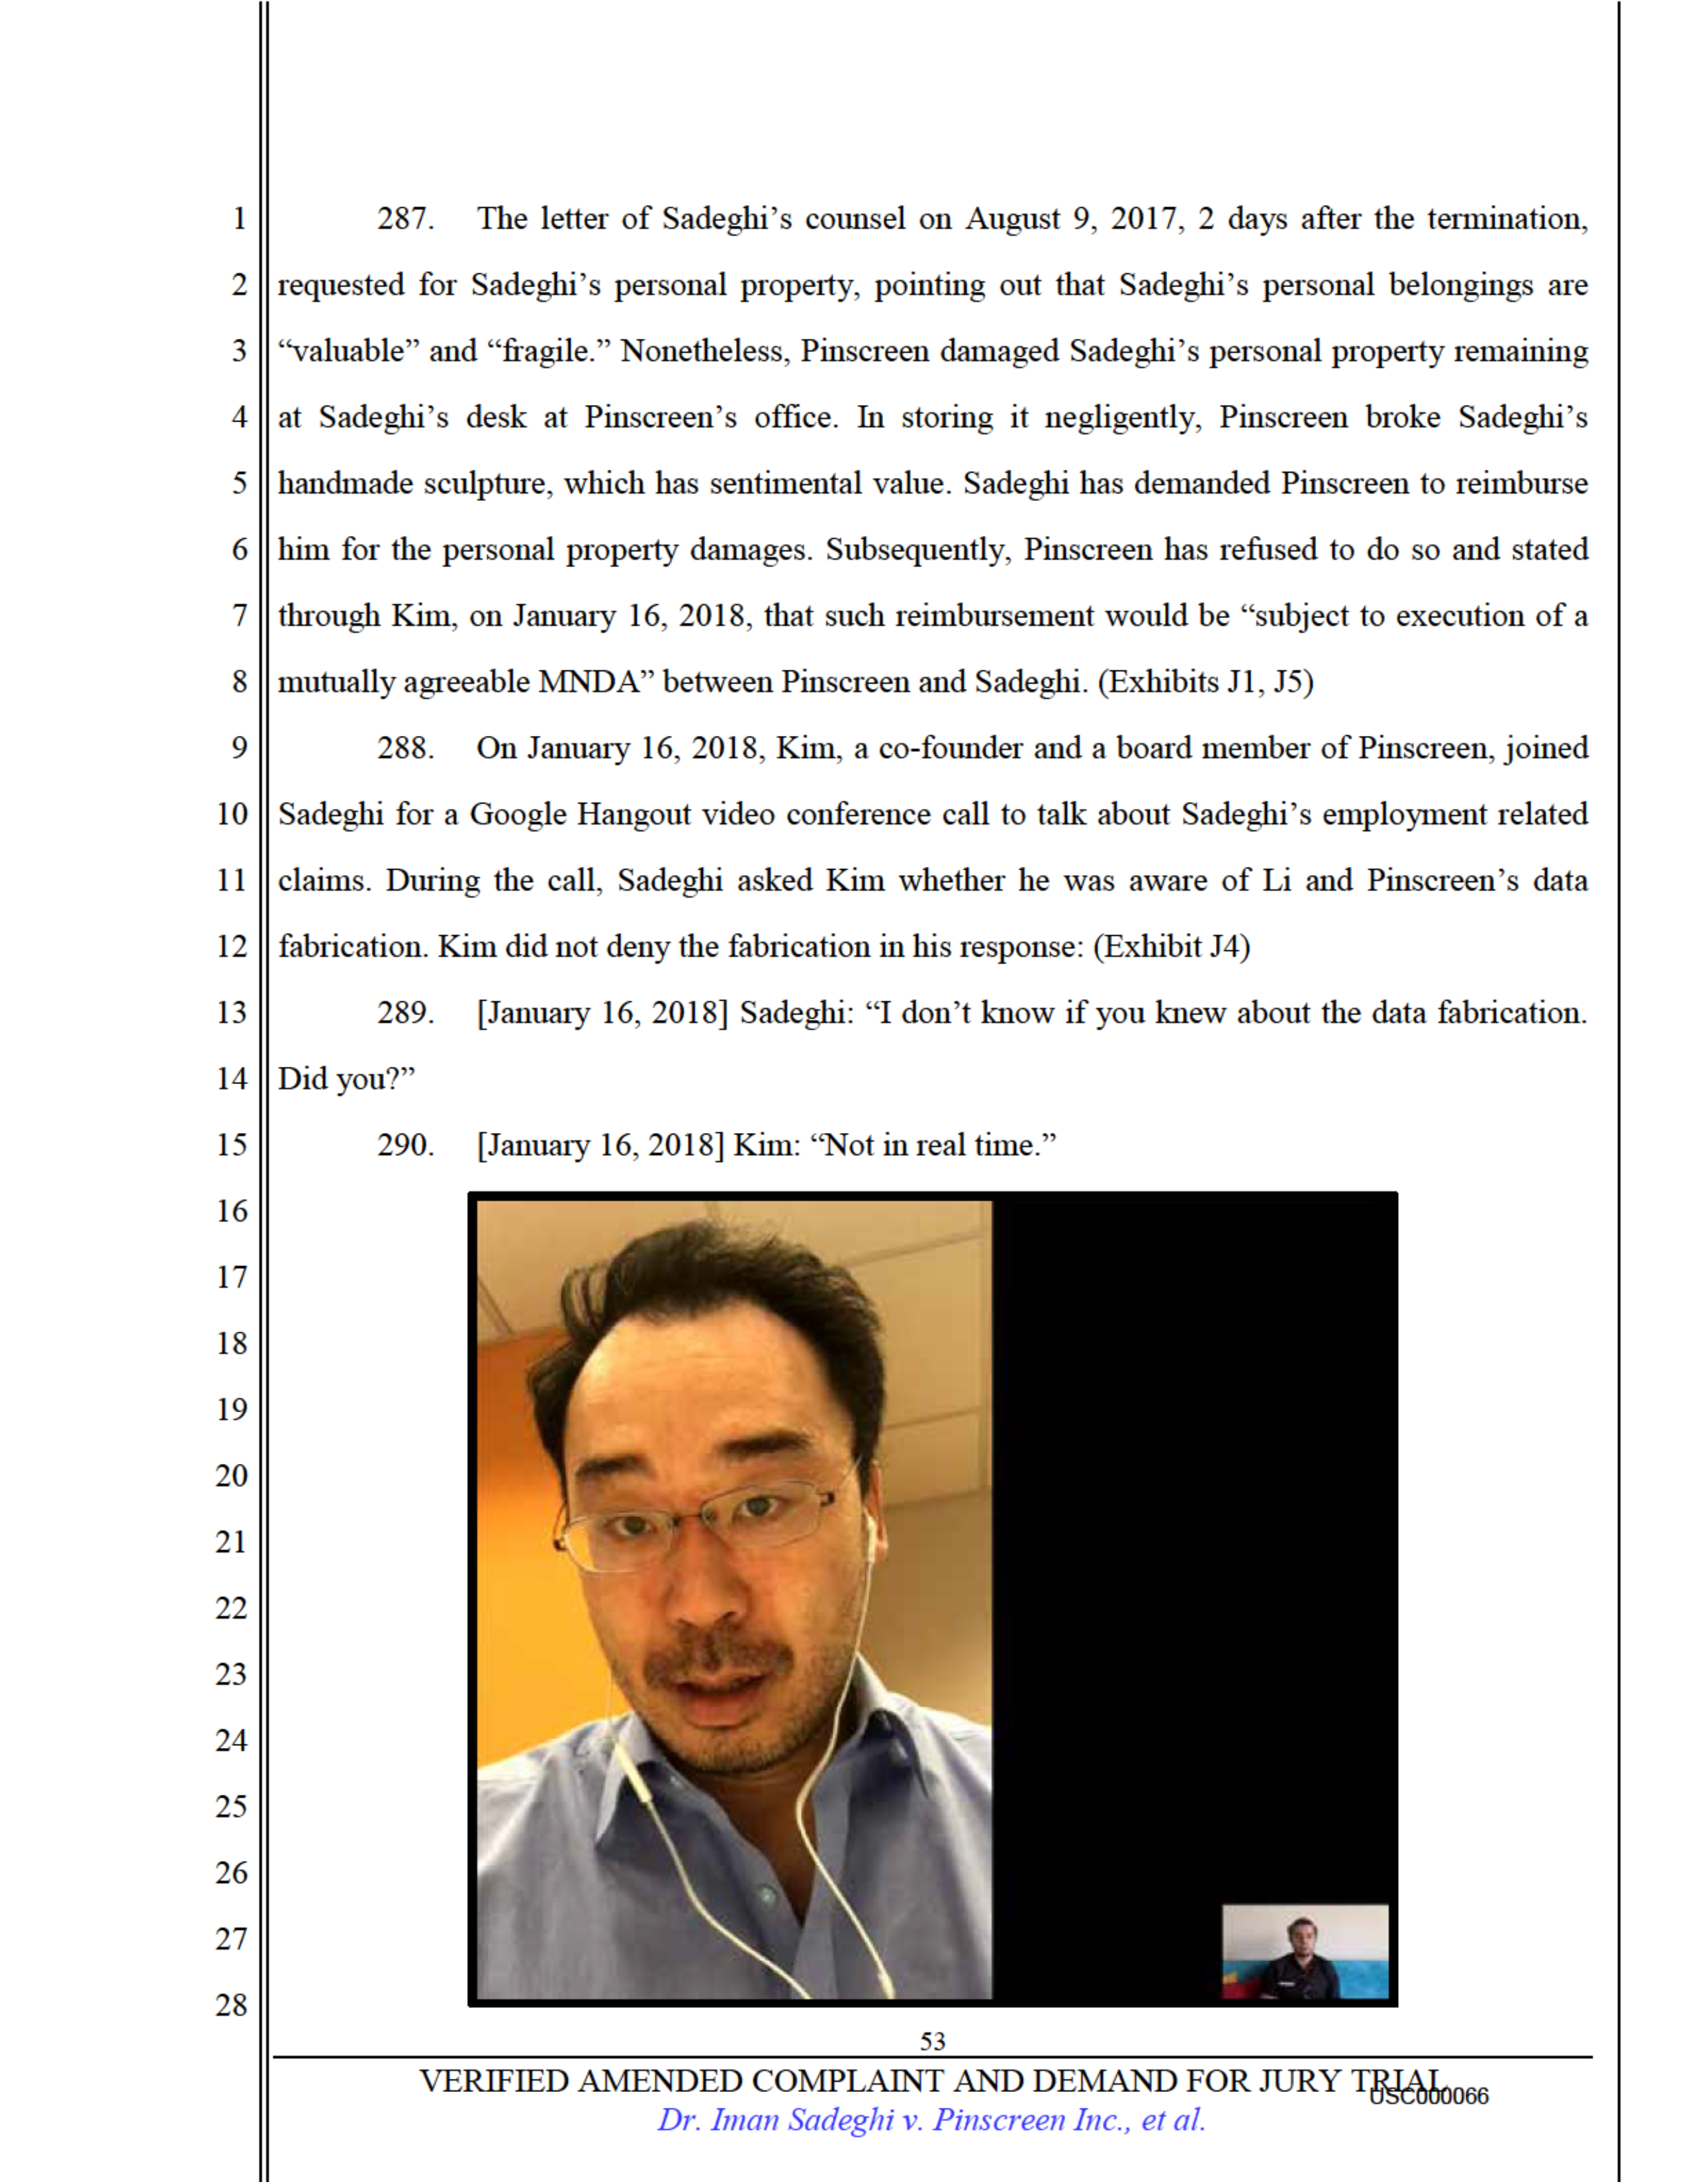 USC's Investigation Report re Hao Li's and Pinscreen's Scientific Misconduct at ACM SIGGRAPH RTL 2017 - Full Report Page 68